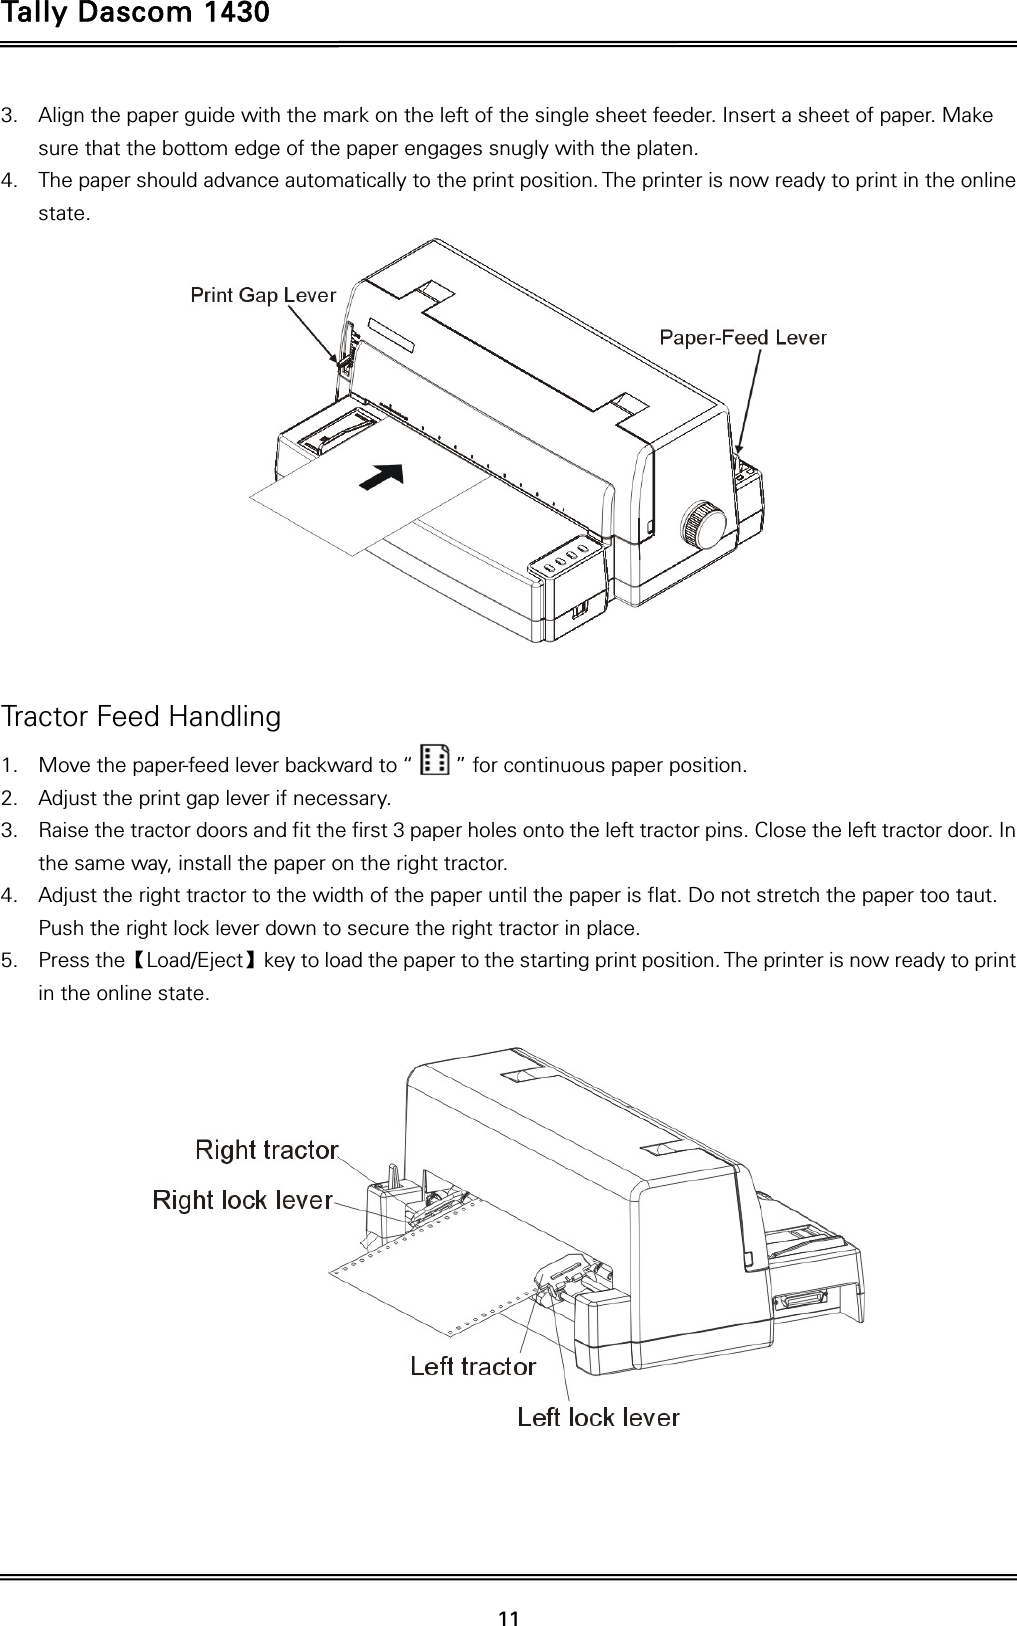 Tally Dascom 1430   11  3. Align the paper guide with the mark on the left of the single sheet feeder. Insert a sheet of paper. Make sure that the bottom edge of the paper engages snugly with the platen. 4. The paper should advance automatically to the print position. The printer is now ready to print in the online state.   Tractor Feed Handling 1. Move the paper-feed lever backward to “        ” for continuous paper position. 2. Adjust the print gap lever if necessary.   3. Raise the tractor doors and fit the first 3 paper holes onto the left tractor pins. Close the left tractor door. In the same way, install the paper on the right tractor.   4. Adjust the right tractor to the width of the paper until the paper is flat. Do not stretch the paper too taut. Push the right lock lever down to secure the right tractor in place. 5. Press the【Load/Eject】key to load the paper to the starting print position. The printer is now ready to print in the online state.     